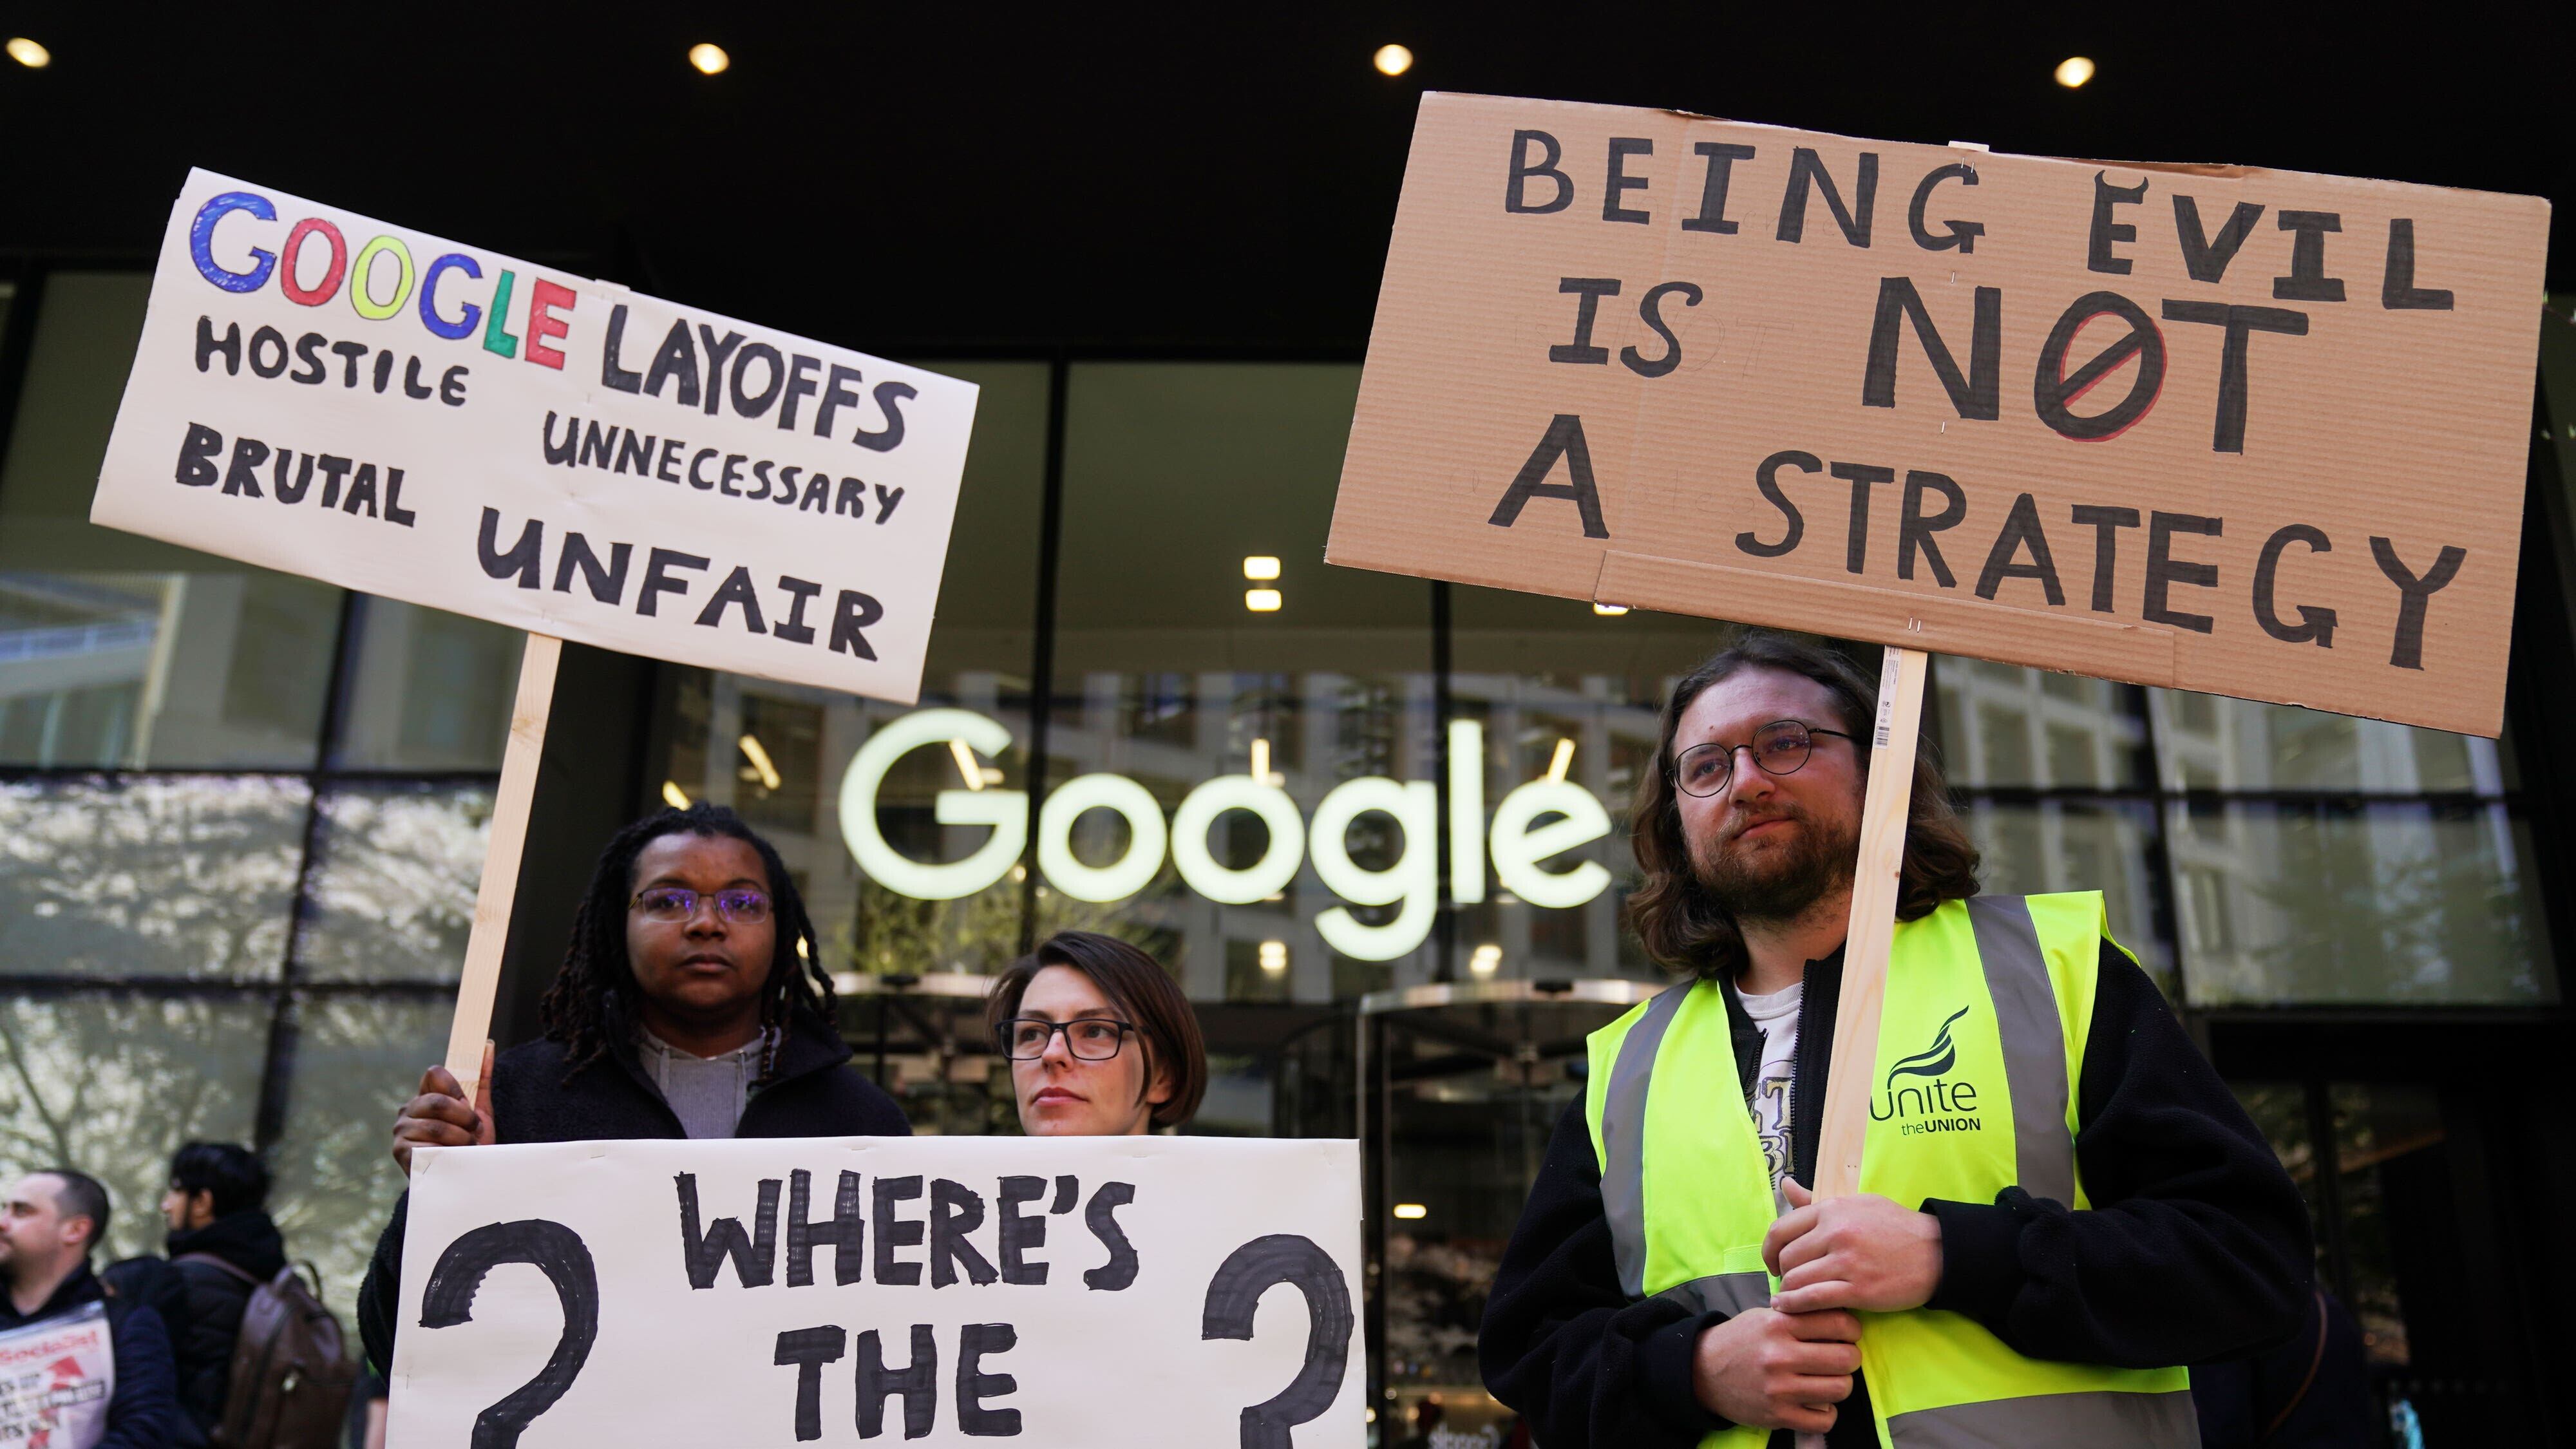 Employees protested outside the tech giant’s King’s Cross headquarters on Tuesday.